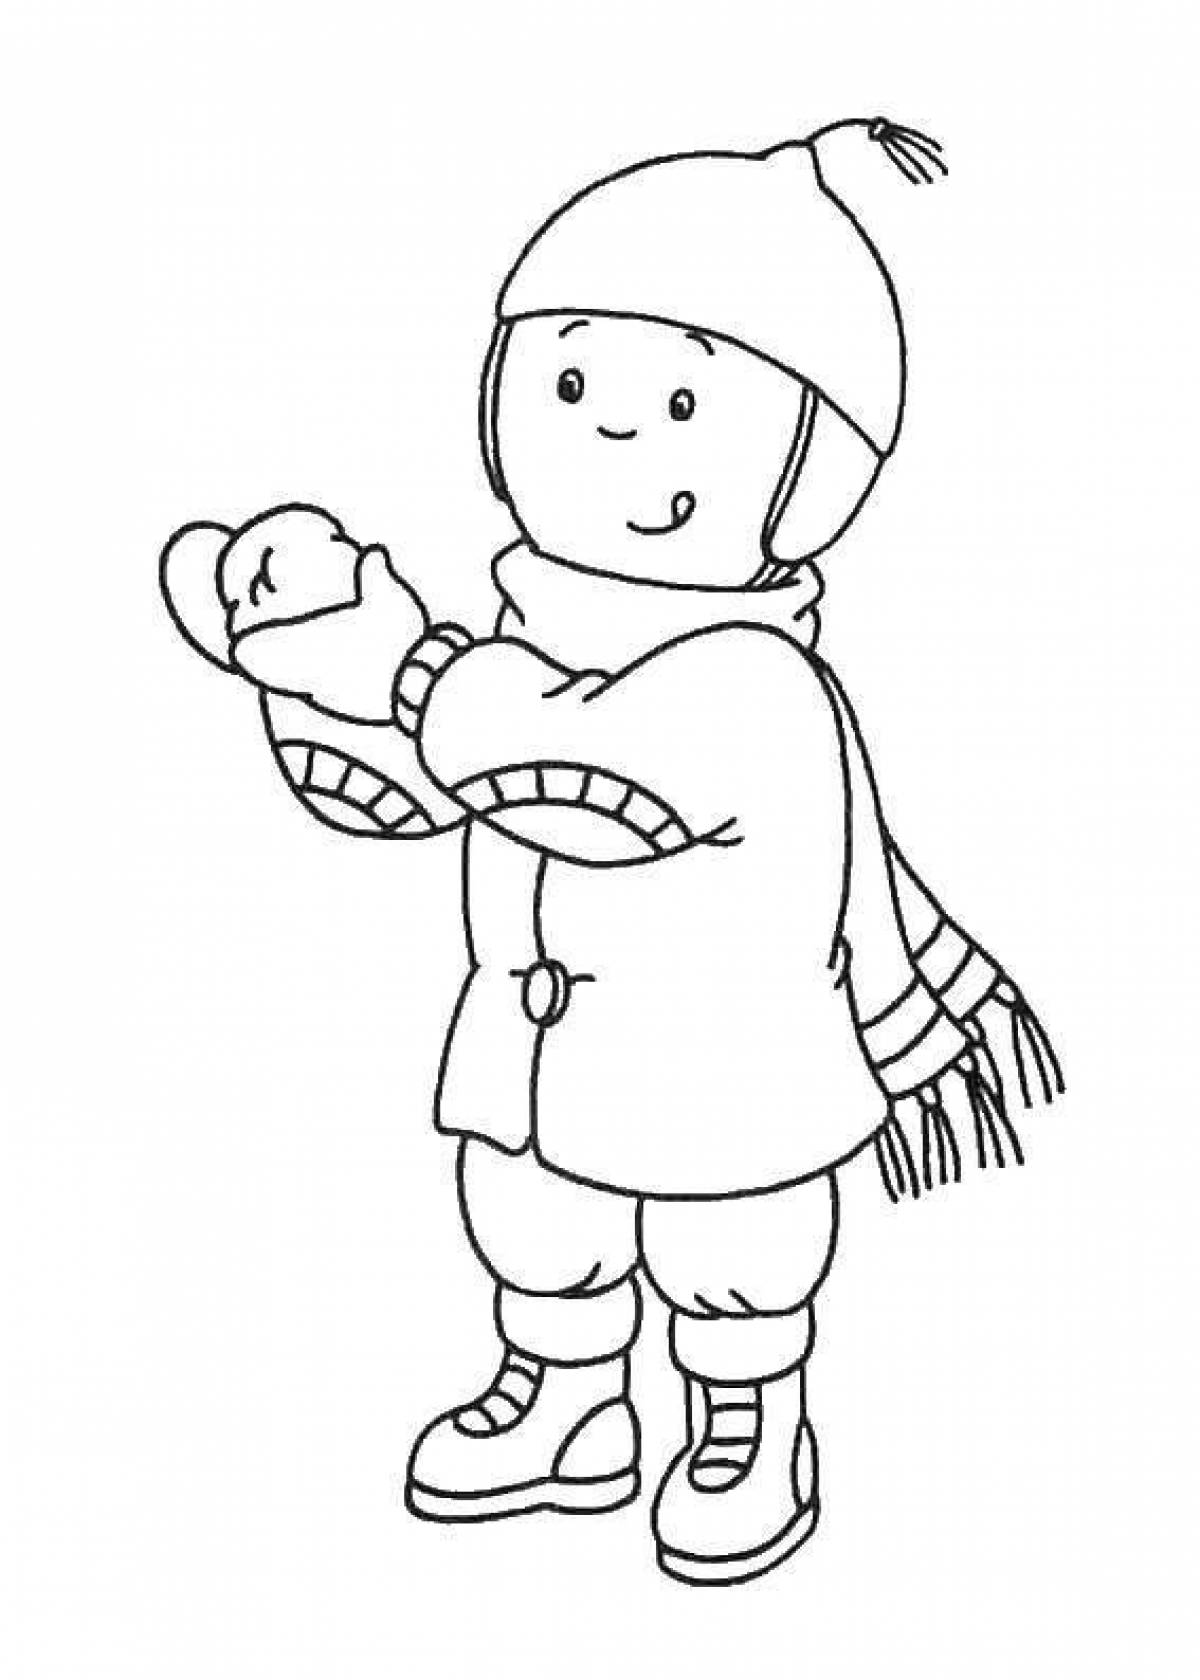 Colourful coloring for children boy in winter clothes